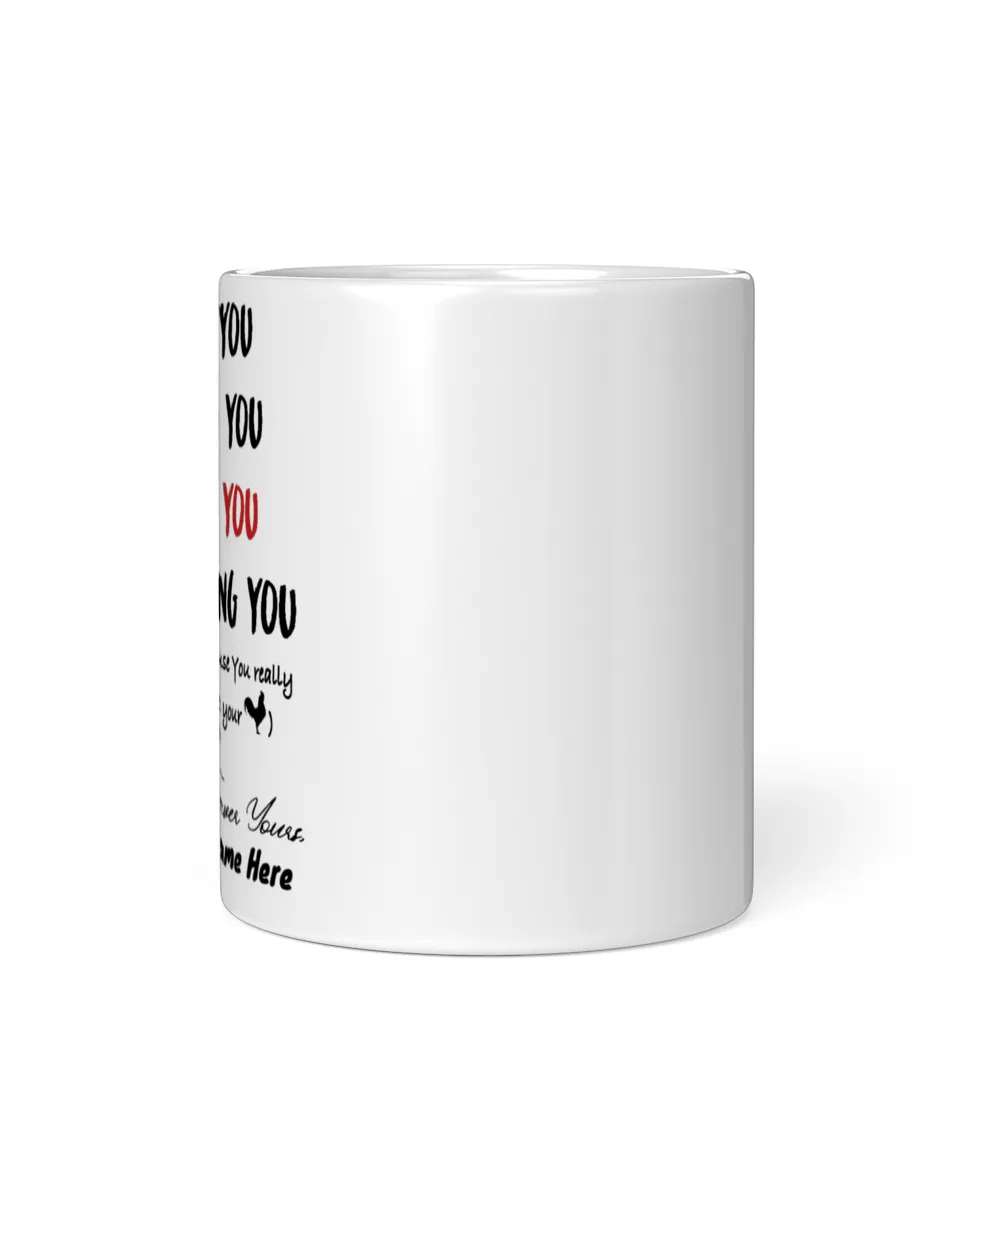 PERSONALIZED MUG: Sweetest Gift For Him - He Would Laugh So Hard While Reading This Mug